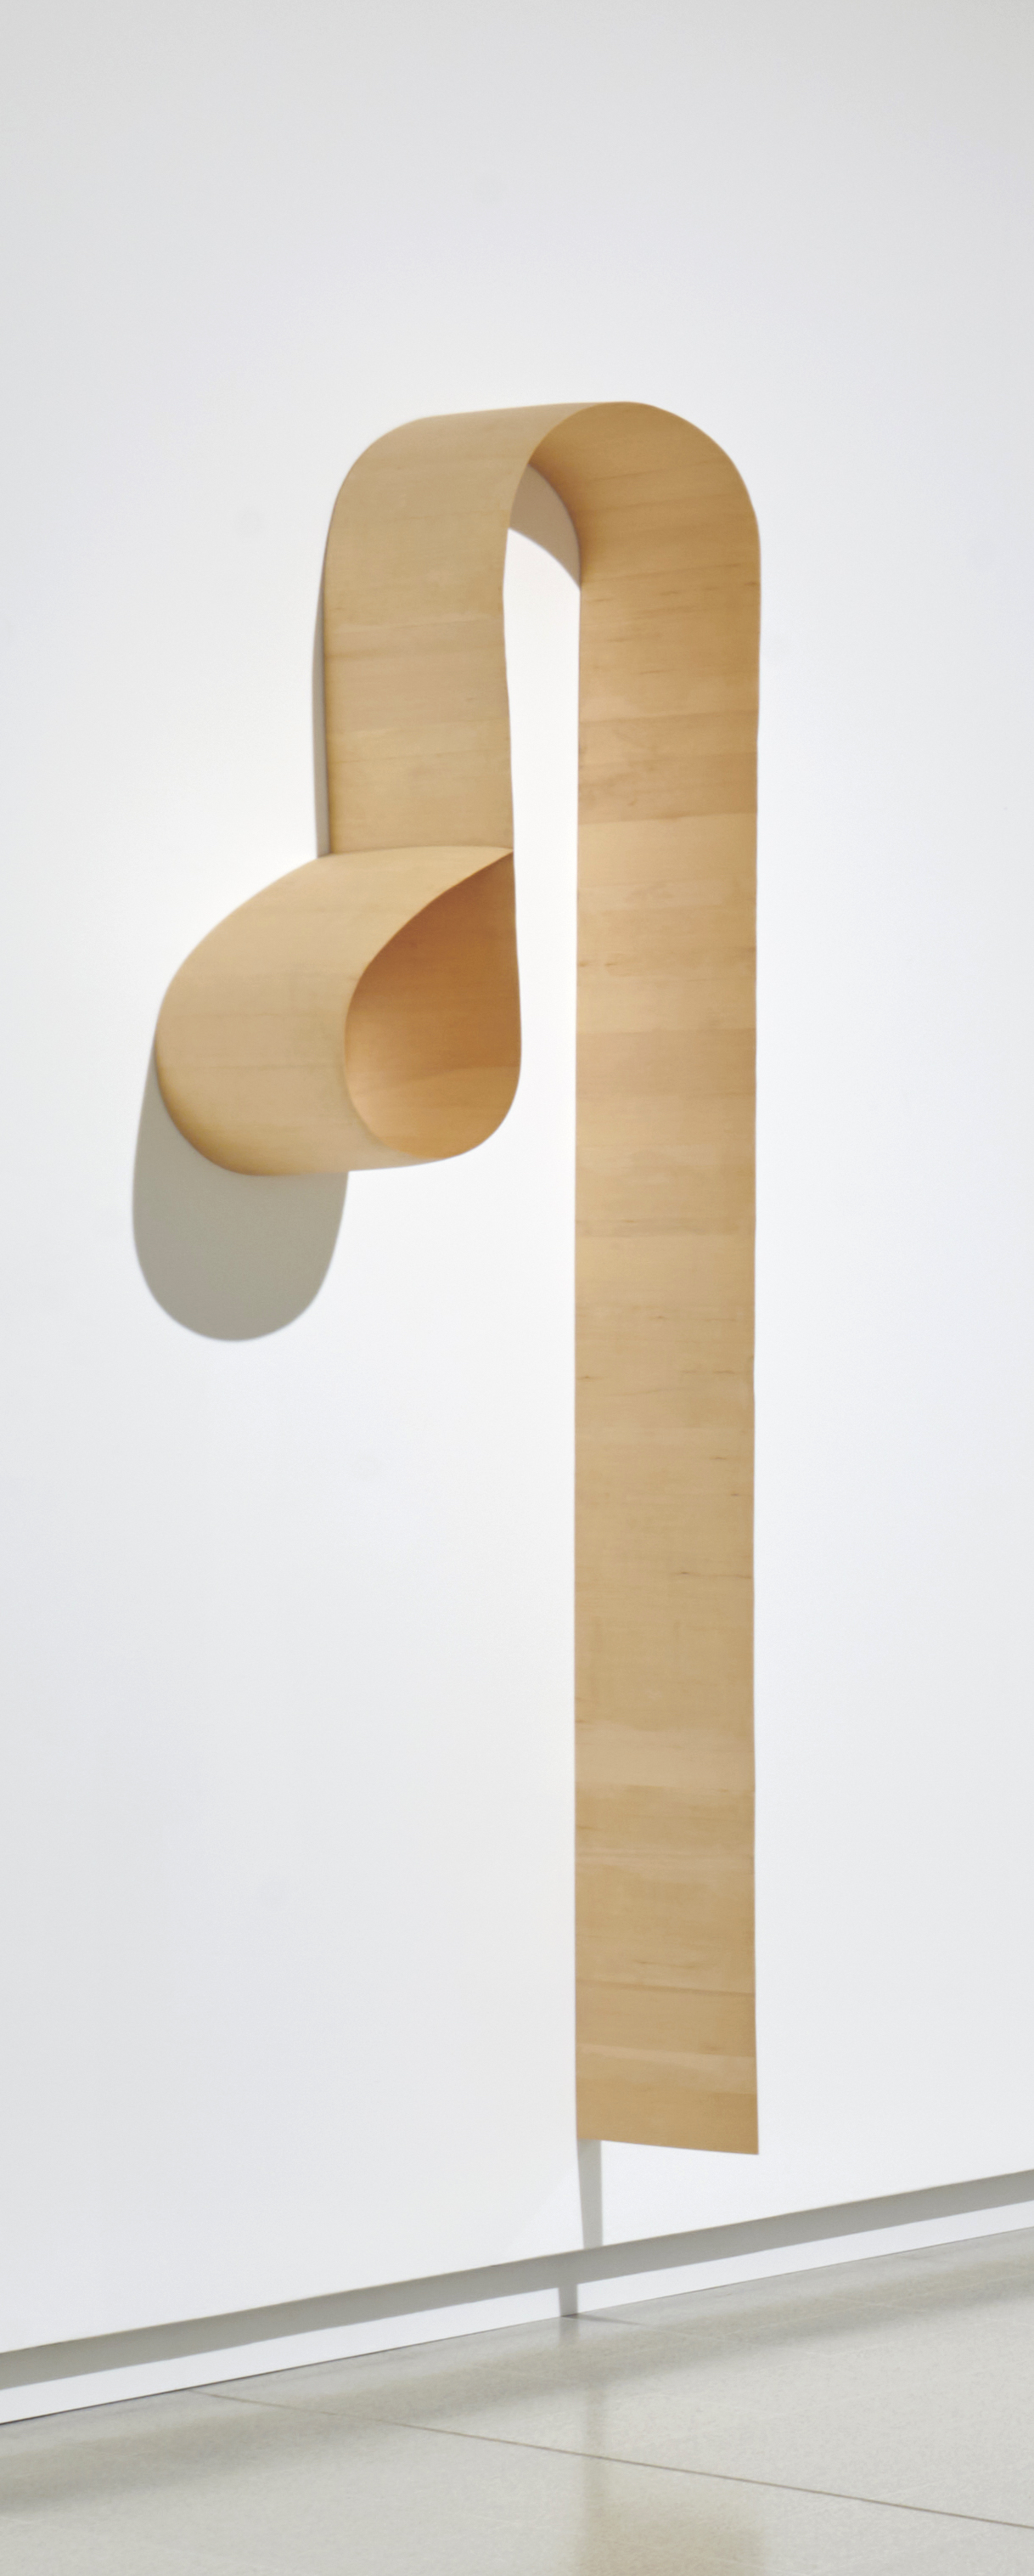 Untitled 2013 by Martin Puryear in When Form Comes Alive. Photo Jo Underhill. Courtesy Hayward Gallery 